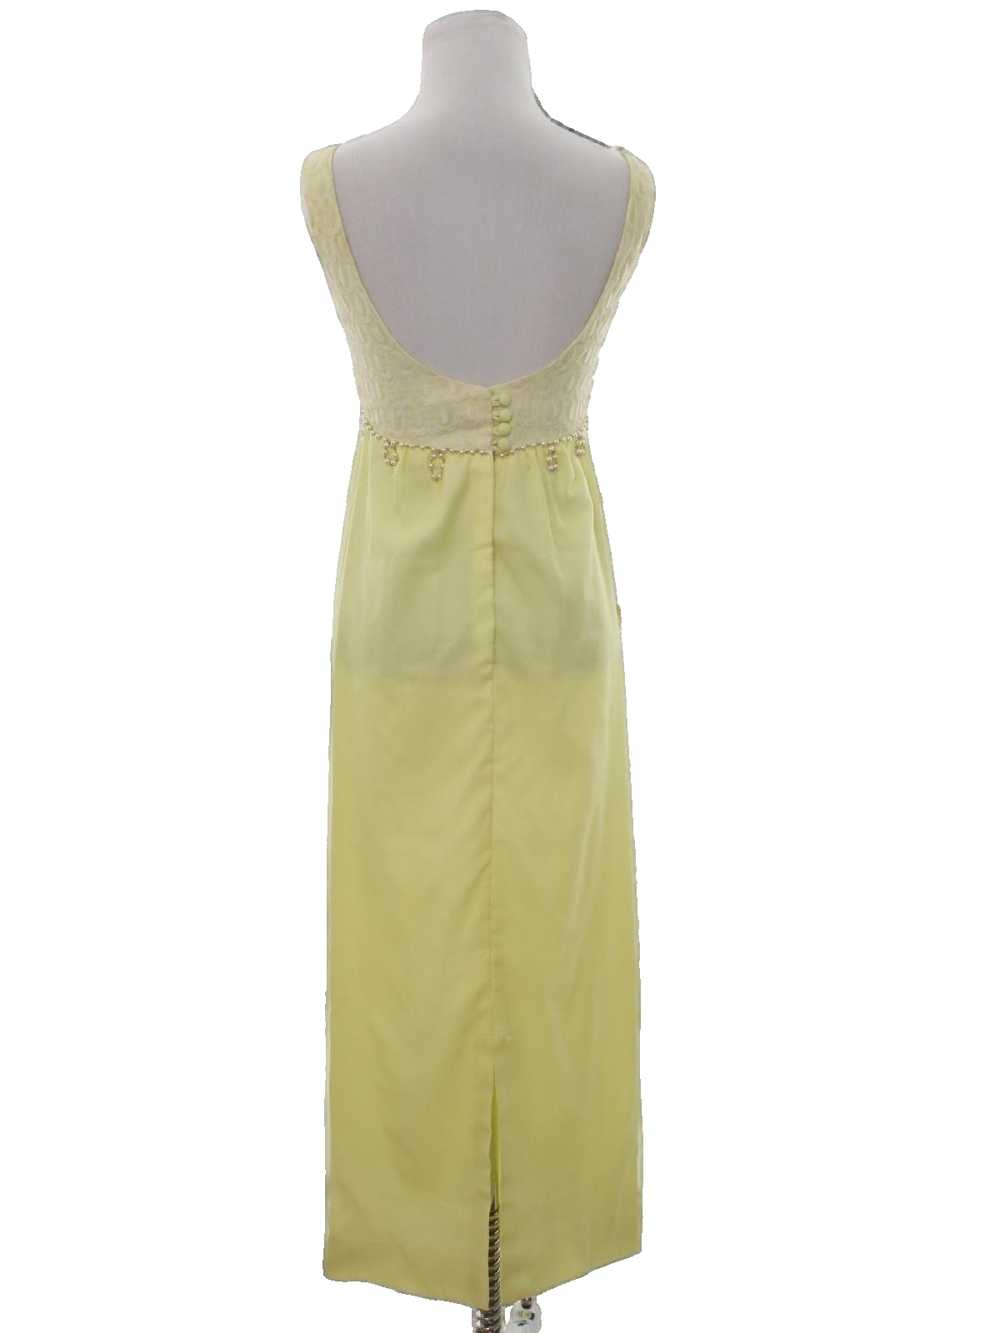 1960's or Girl Cocktail Maxi Dress - image 3